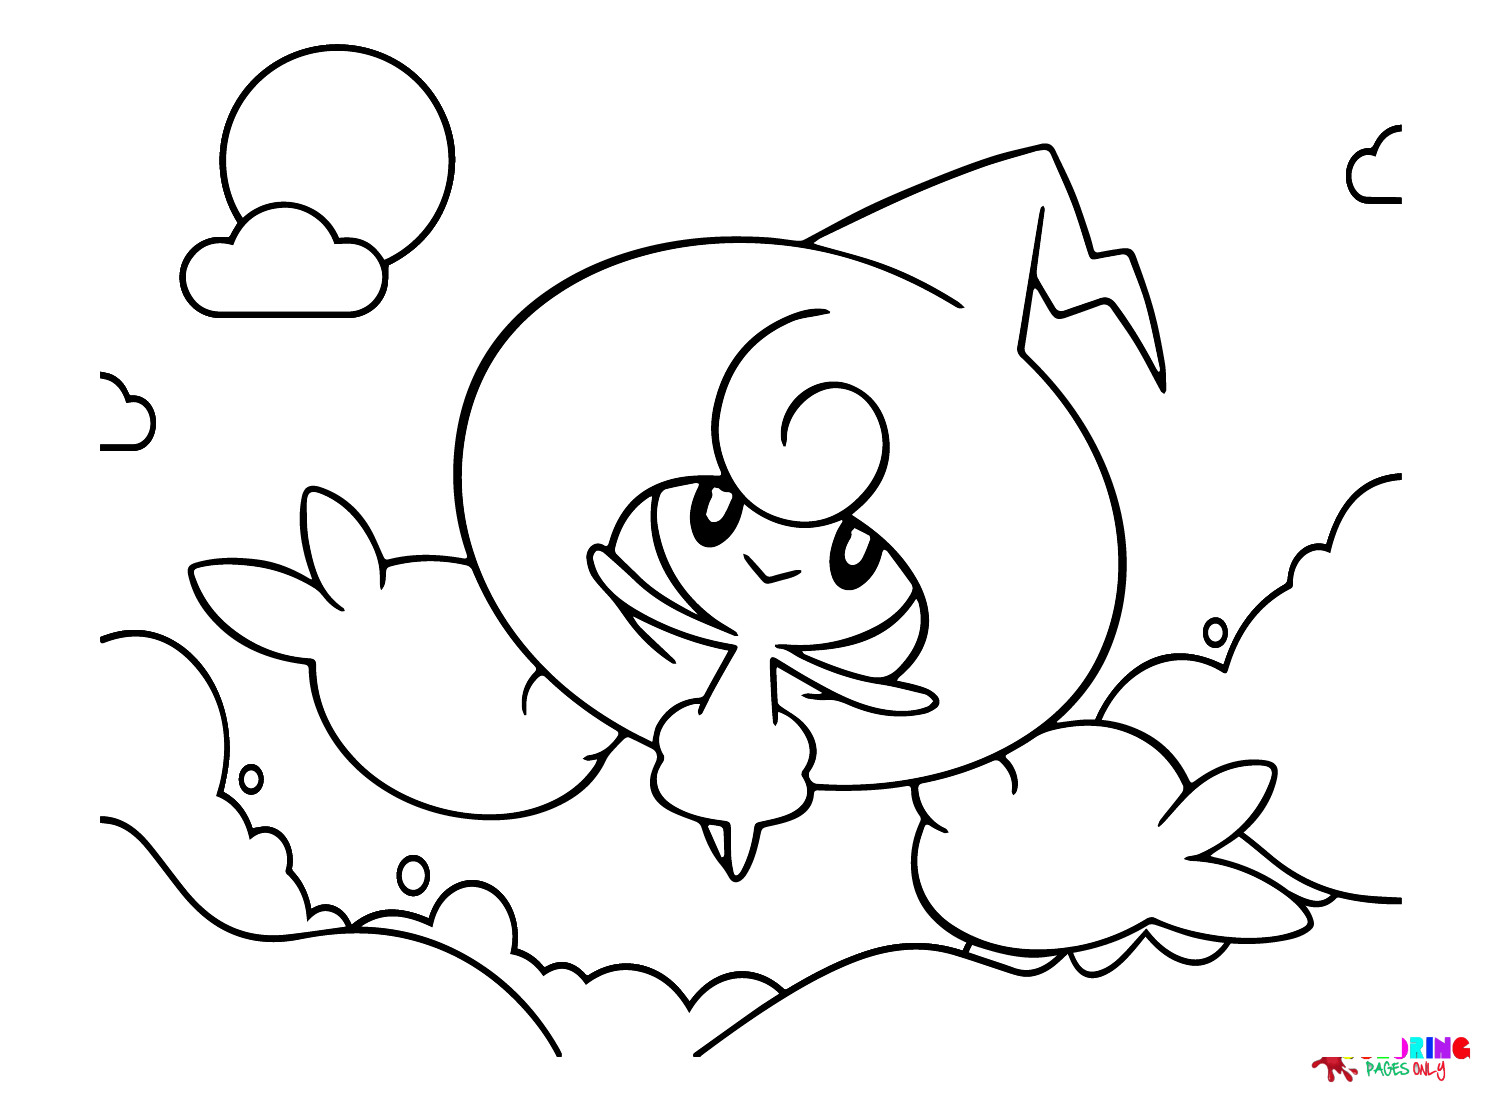 The Pokemon Hattrem Coloring Page